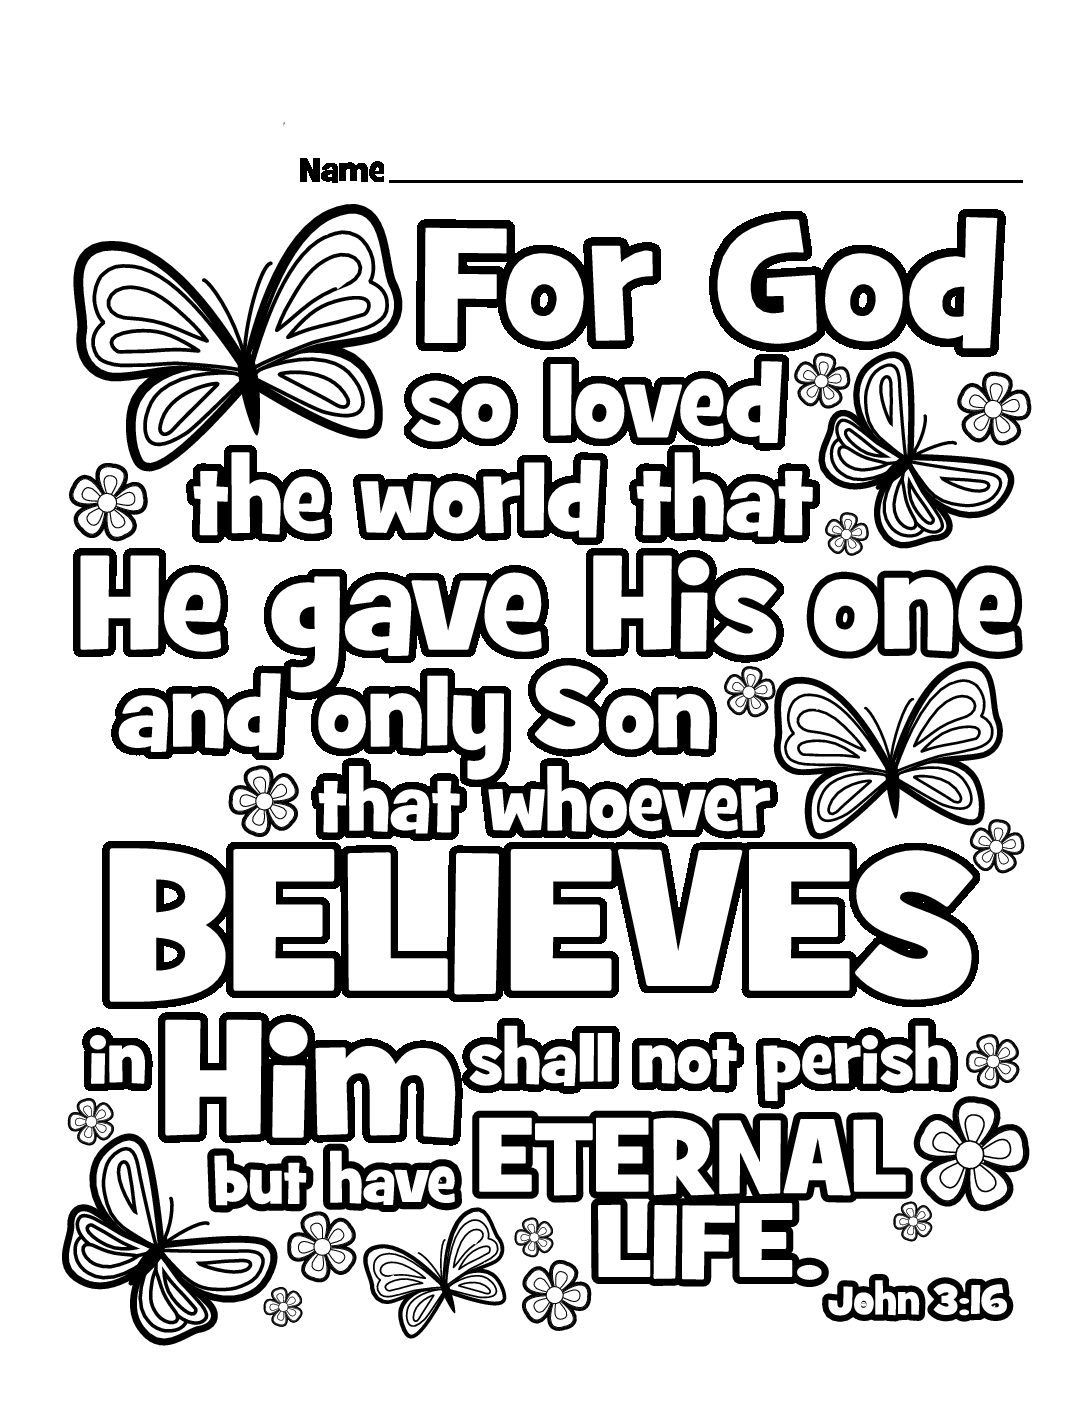 god-is-love-john-3-16-coloring-page-coloring-pages